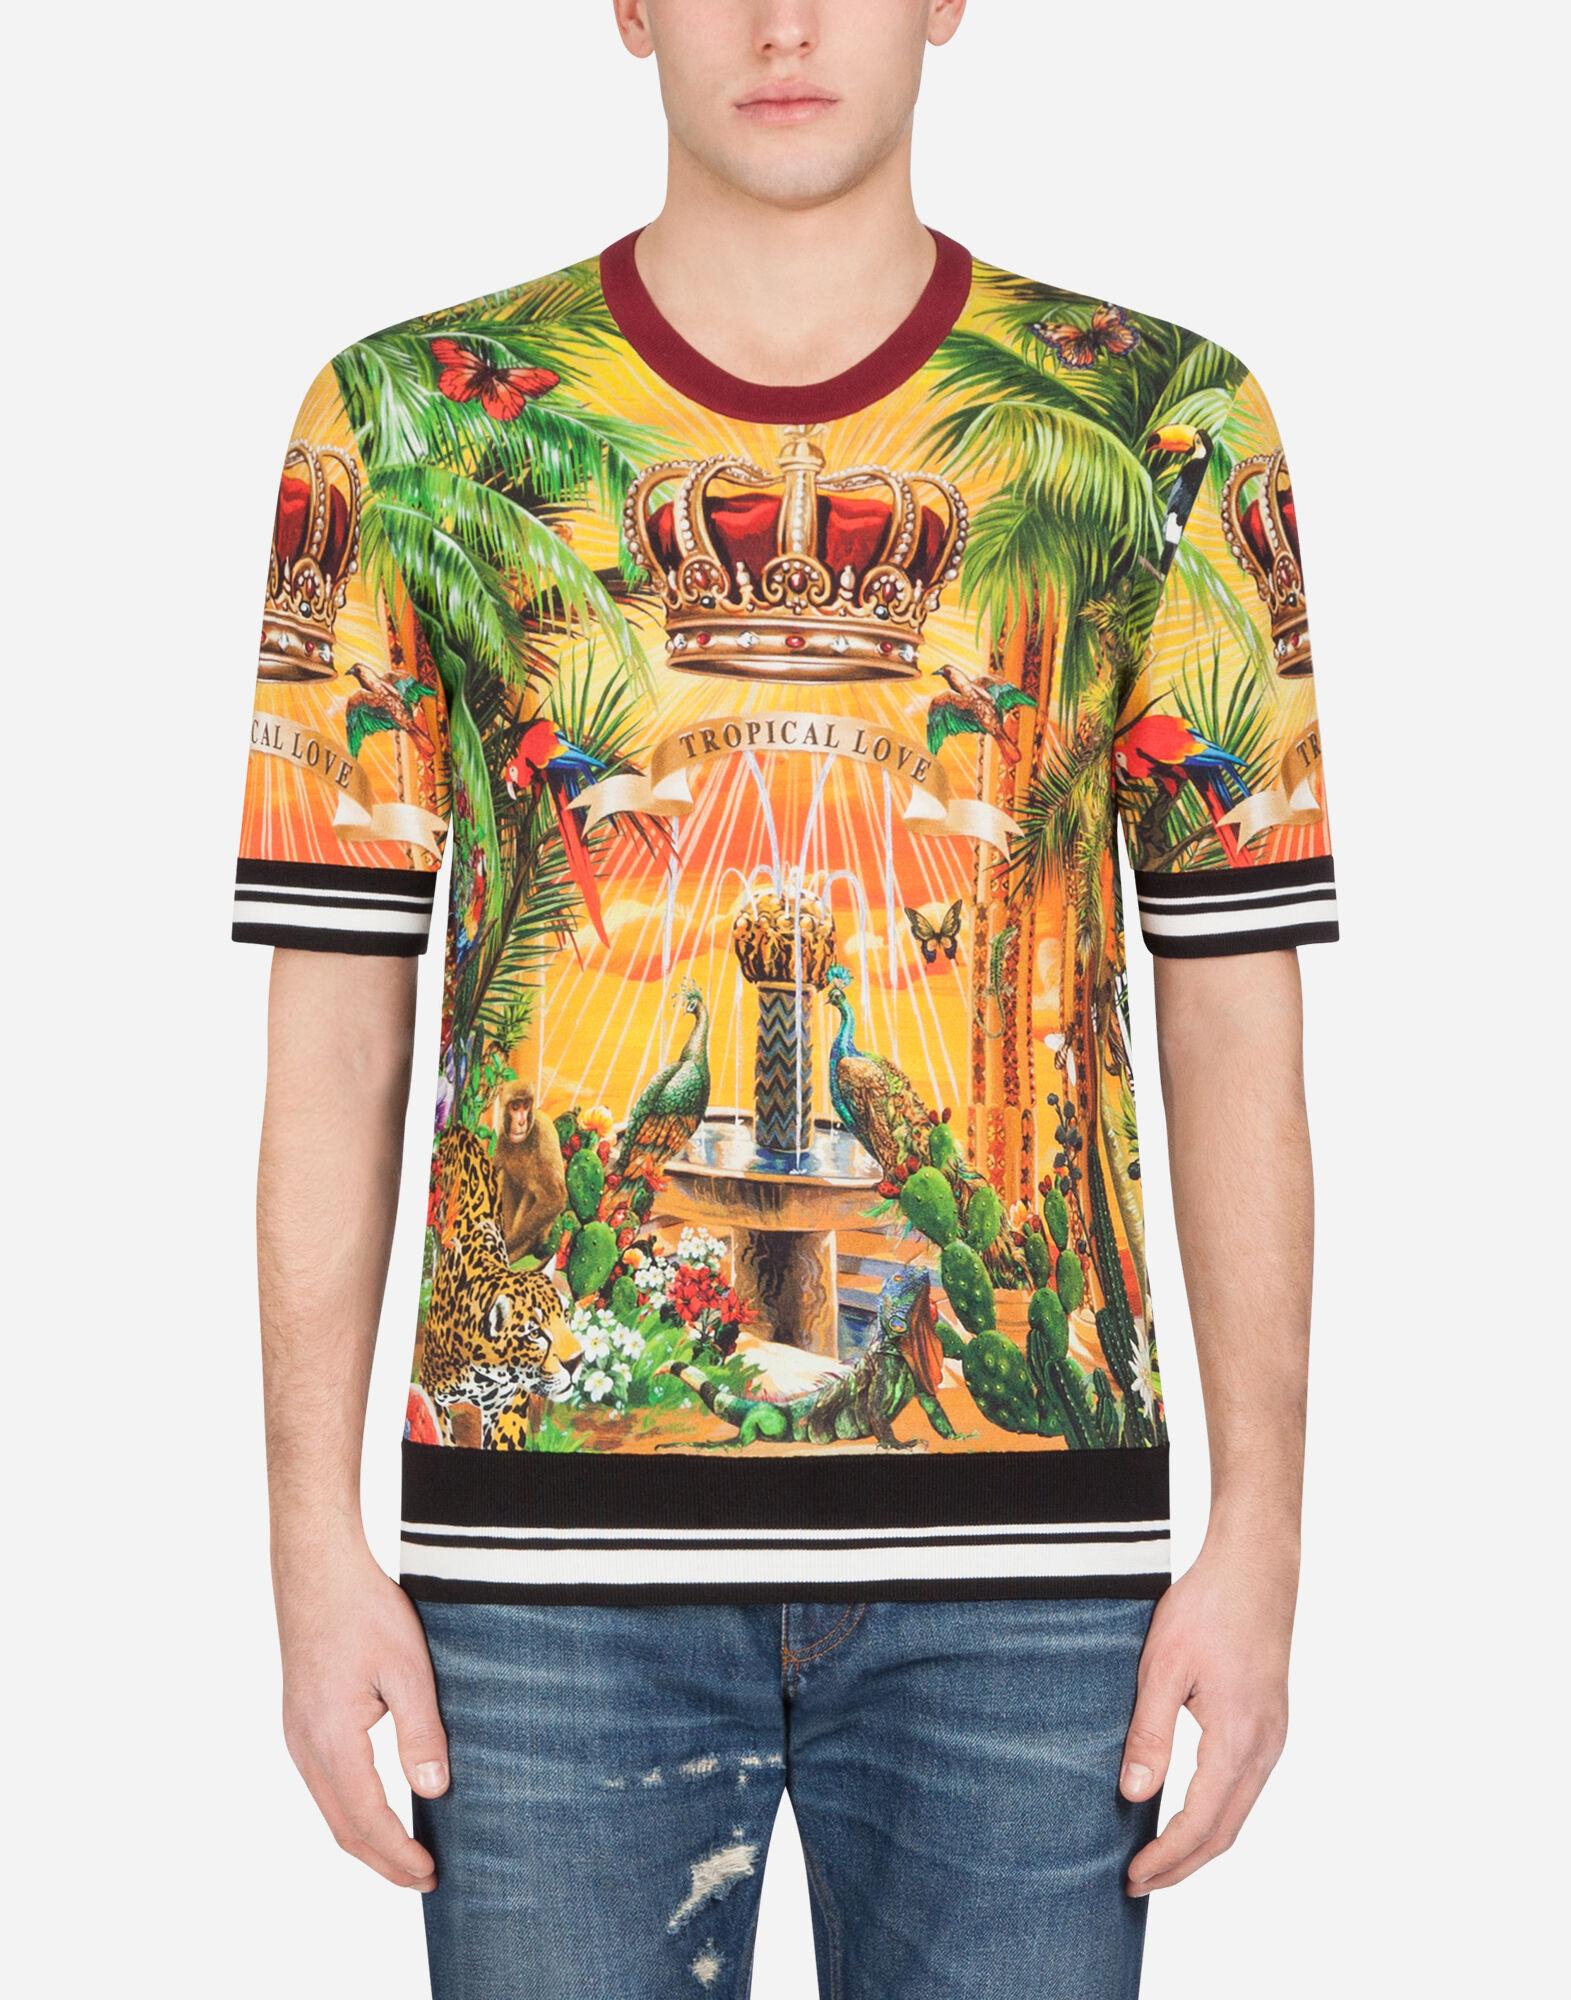 Dolce & Gabbana Silk Polo Shirt With Tropical King Print for Men - Lyst